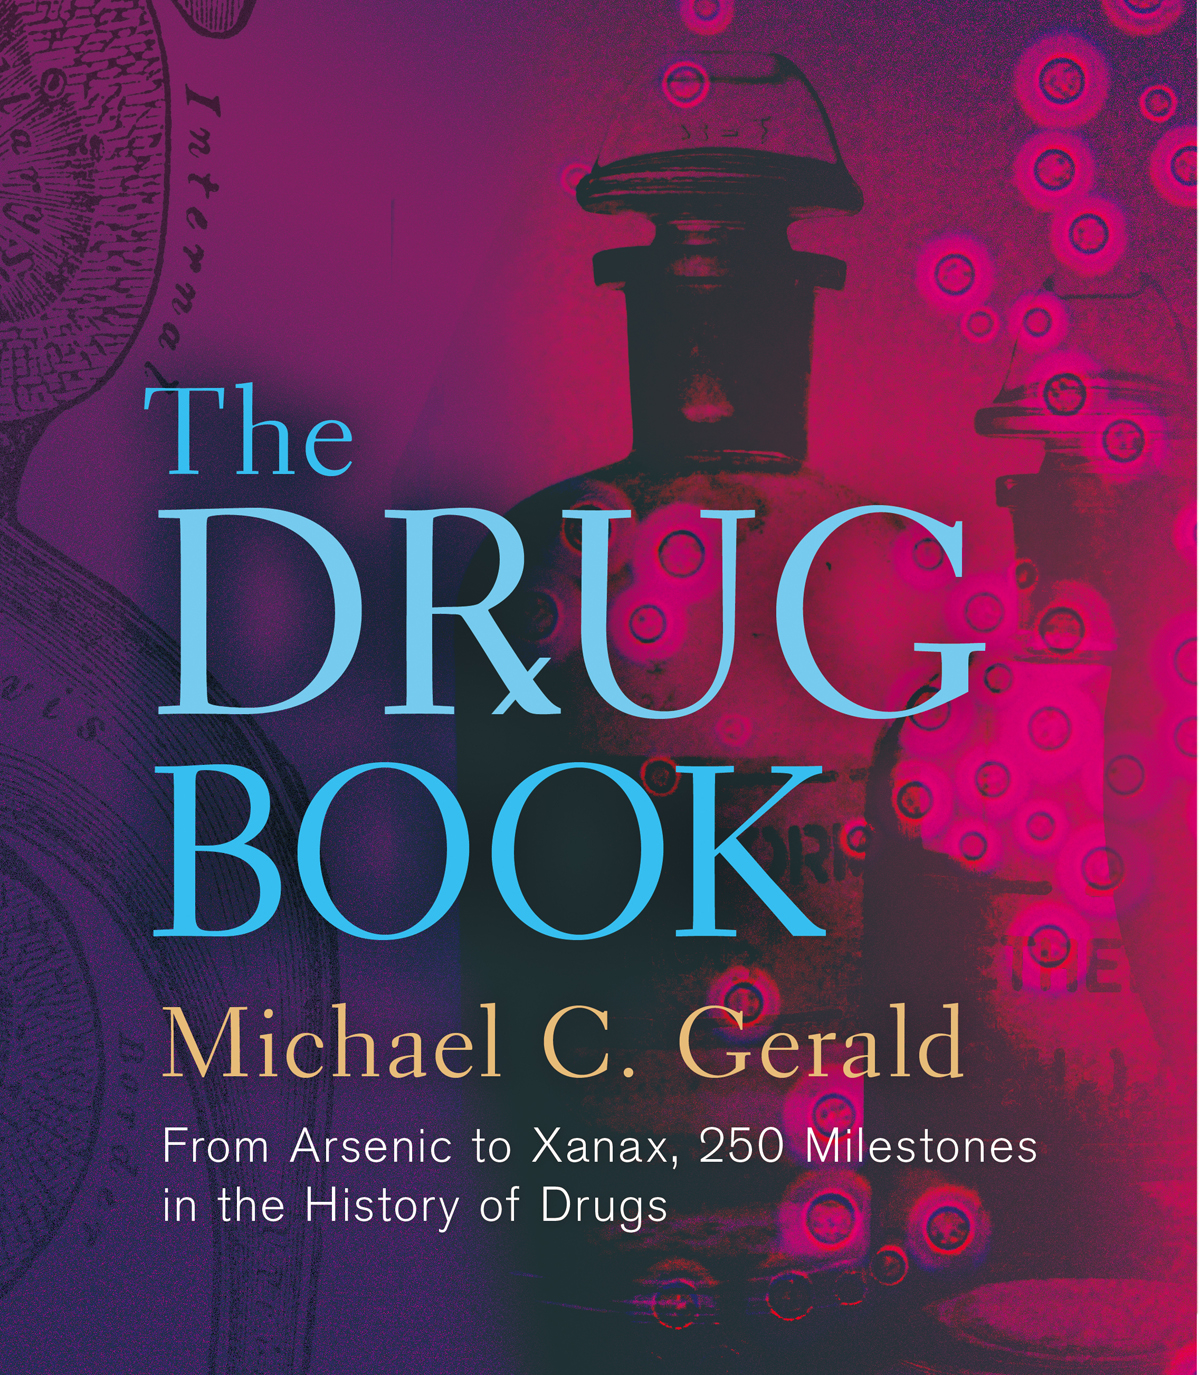 The Drug Book: From Arsenic to Xanax, 250 Milestones in the History of Drug